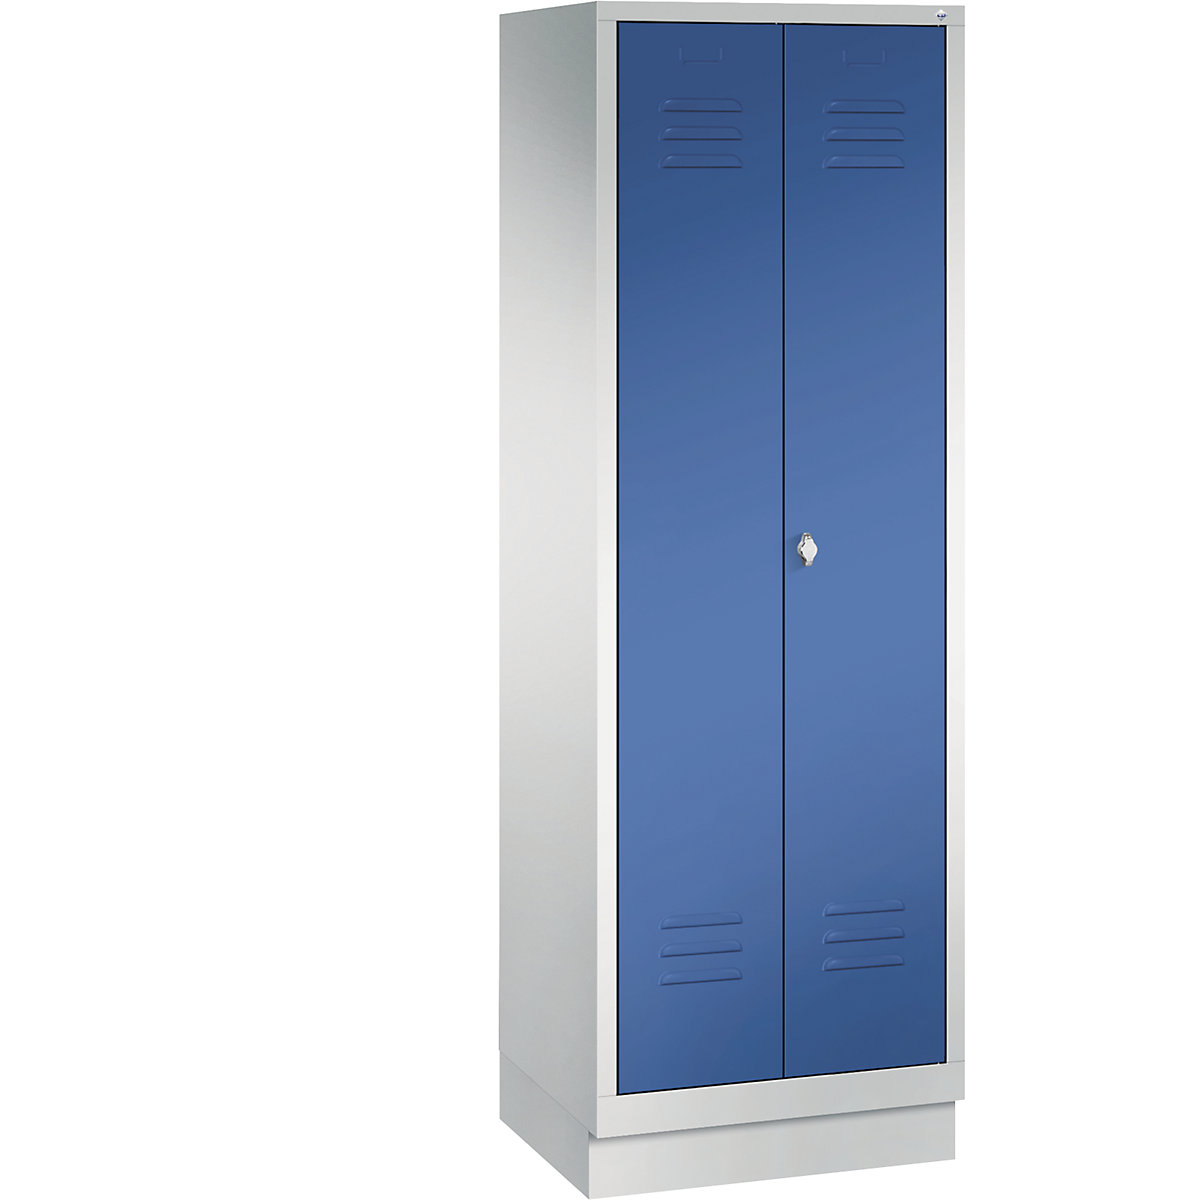 CLASSIC storage cupboard with plinth, doors close in the middle – C+P, 2 compartments, compartment width 300 mm, light grey / gentian blue-9